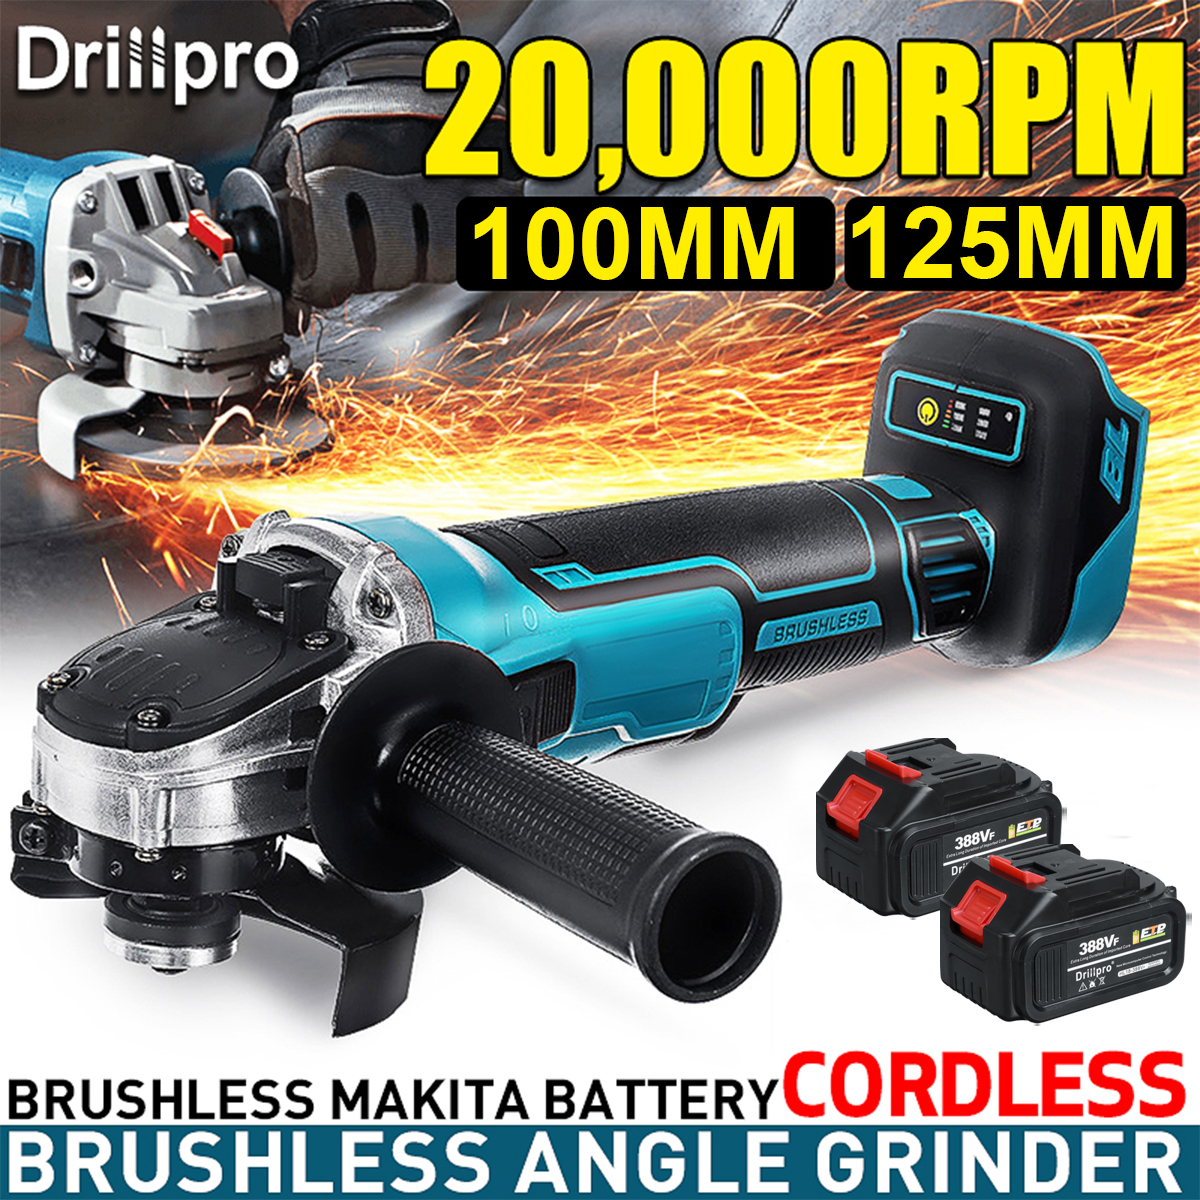 Drillpro-388VF-100mm125mm-Brushless-Angle-Grinder-Rechargeable-Electric-Cutting-Grinding-Tool-W-12-B-1861855-1